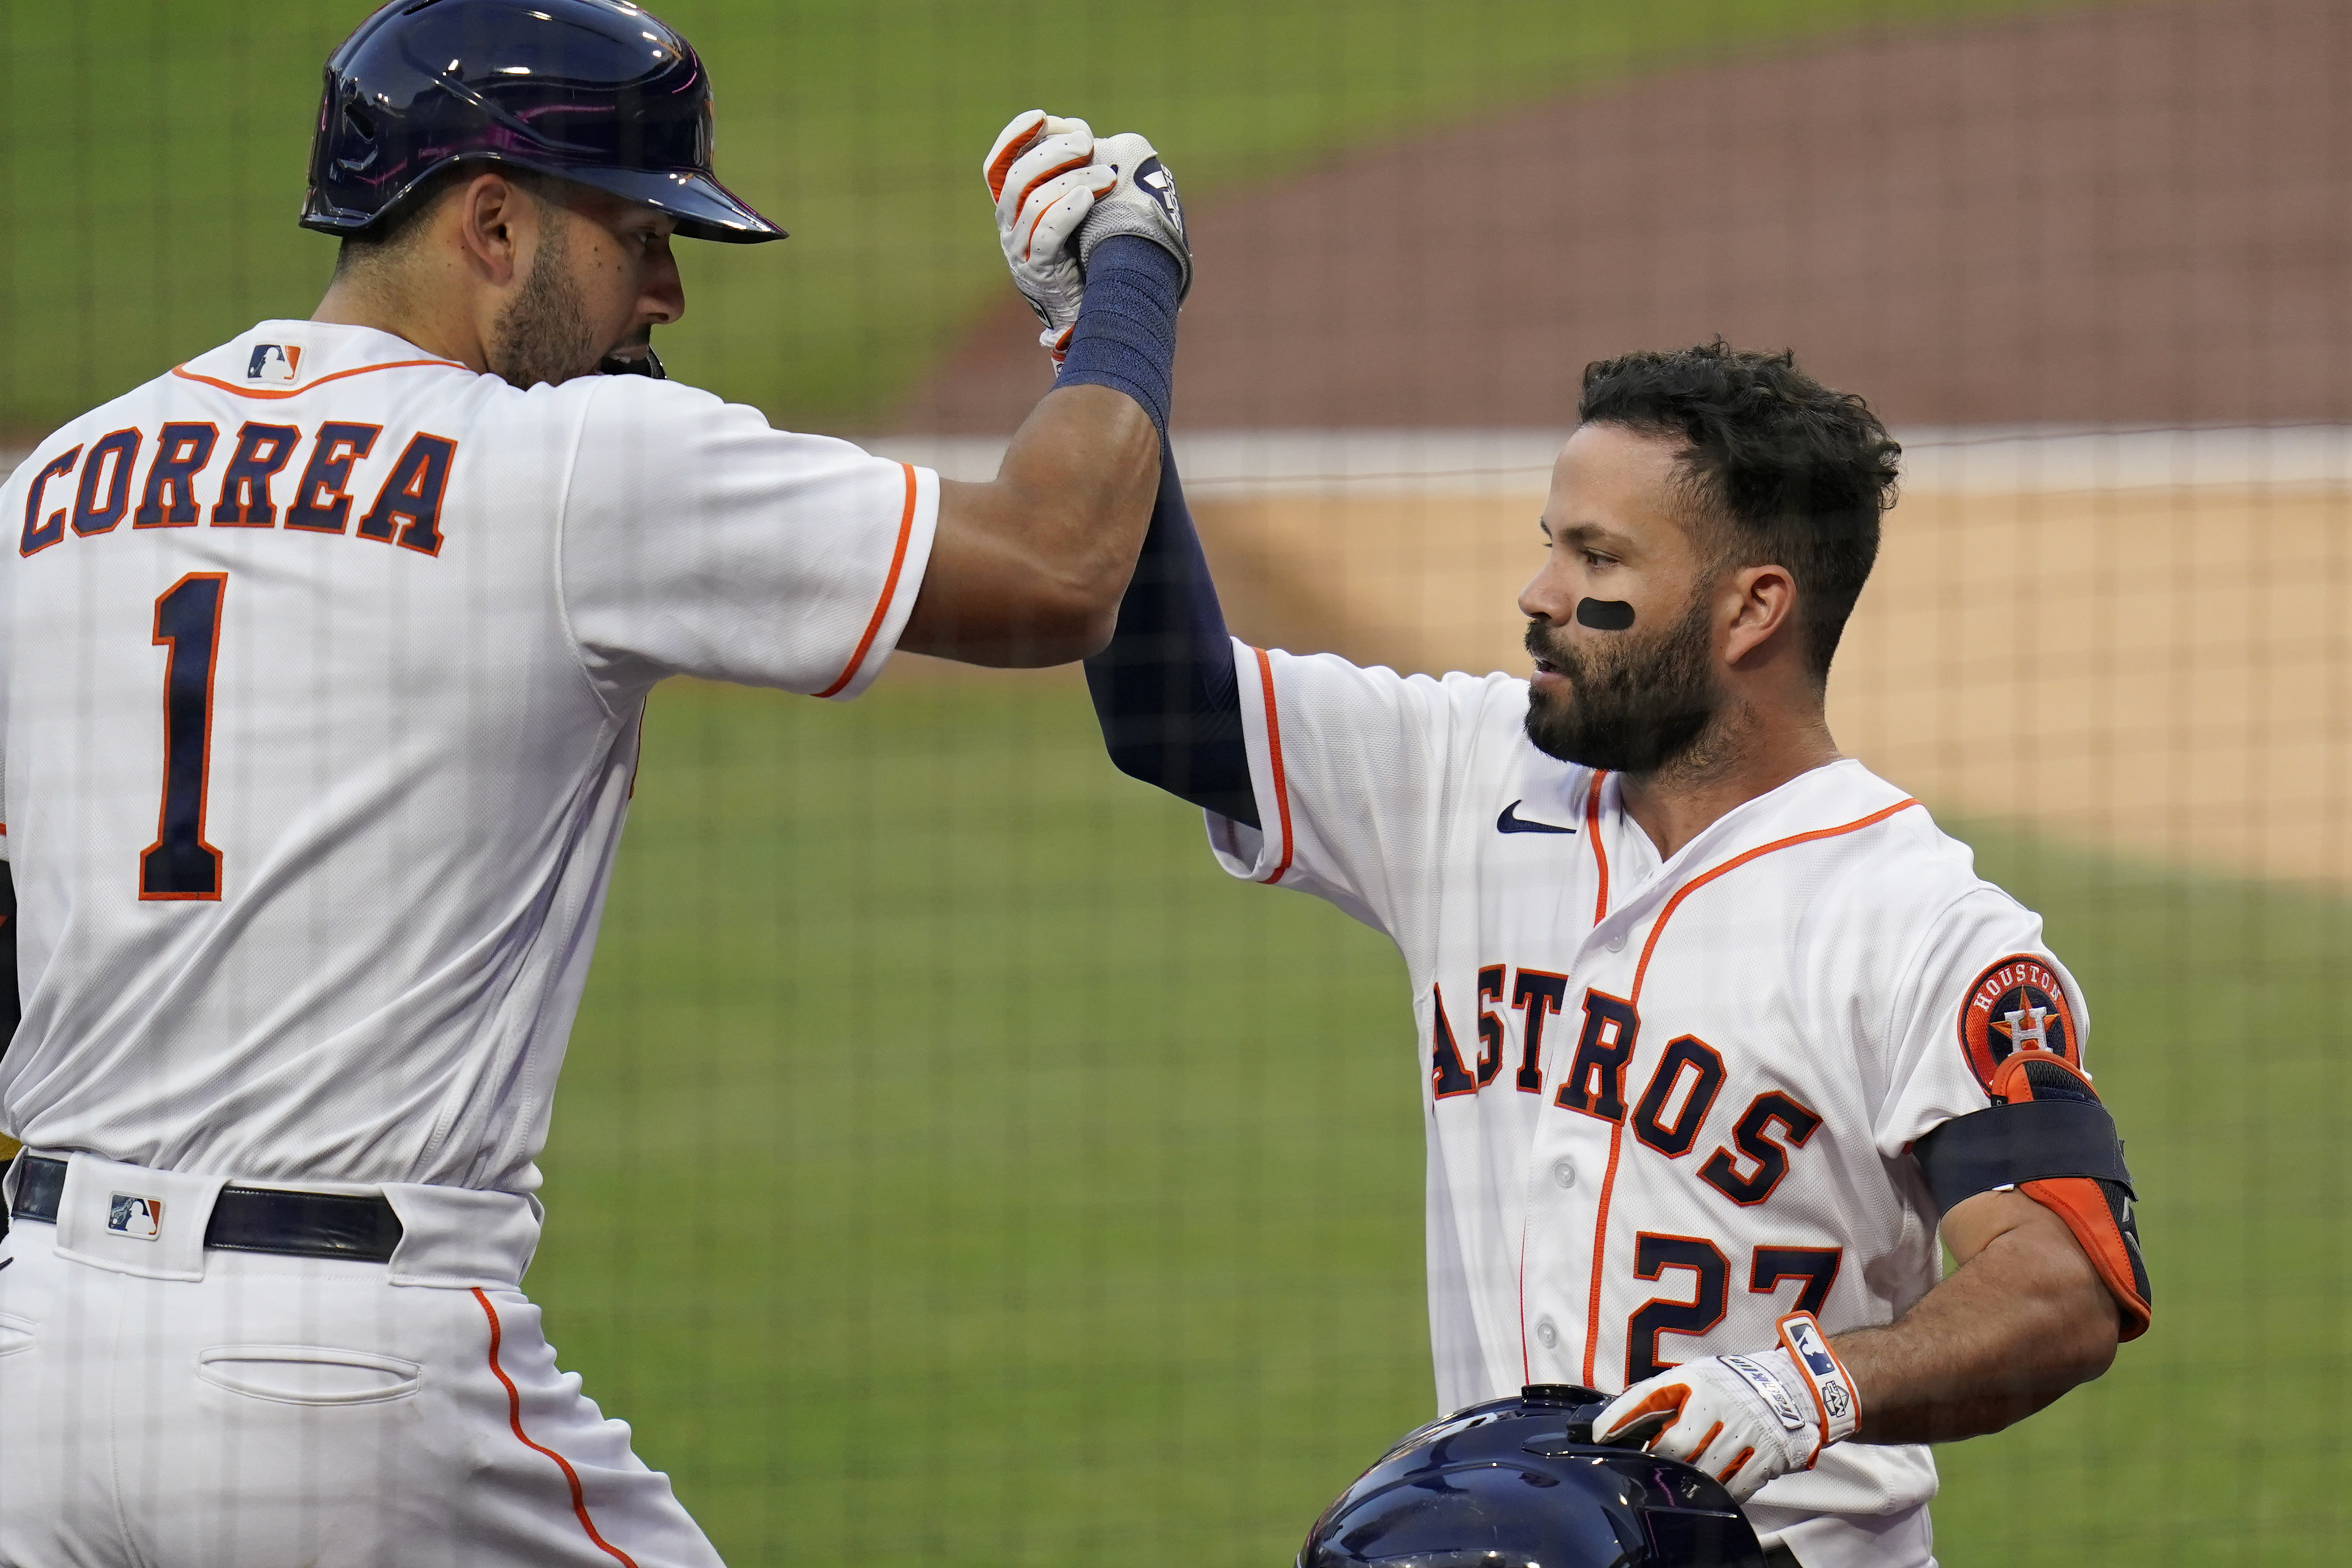 Astros opening day 2021: 5 things to watch for this season